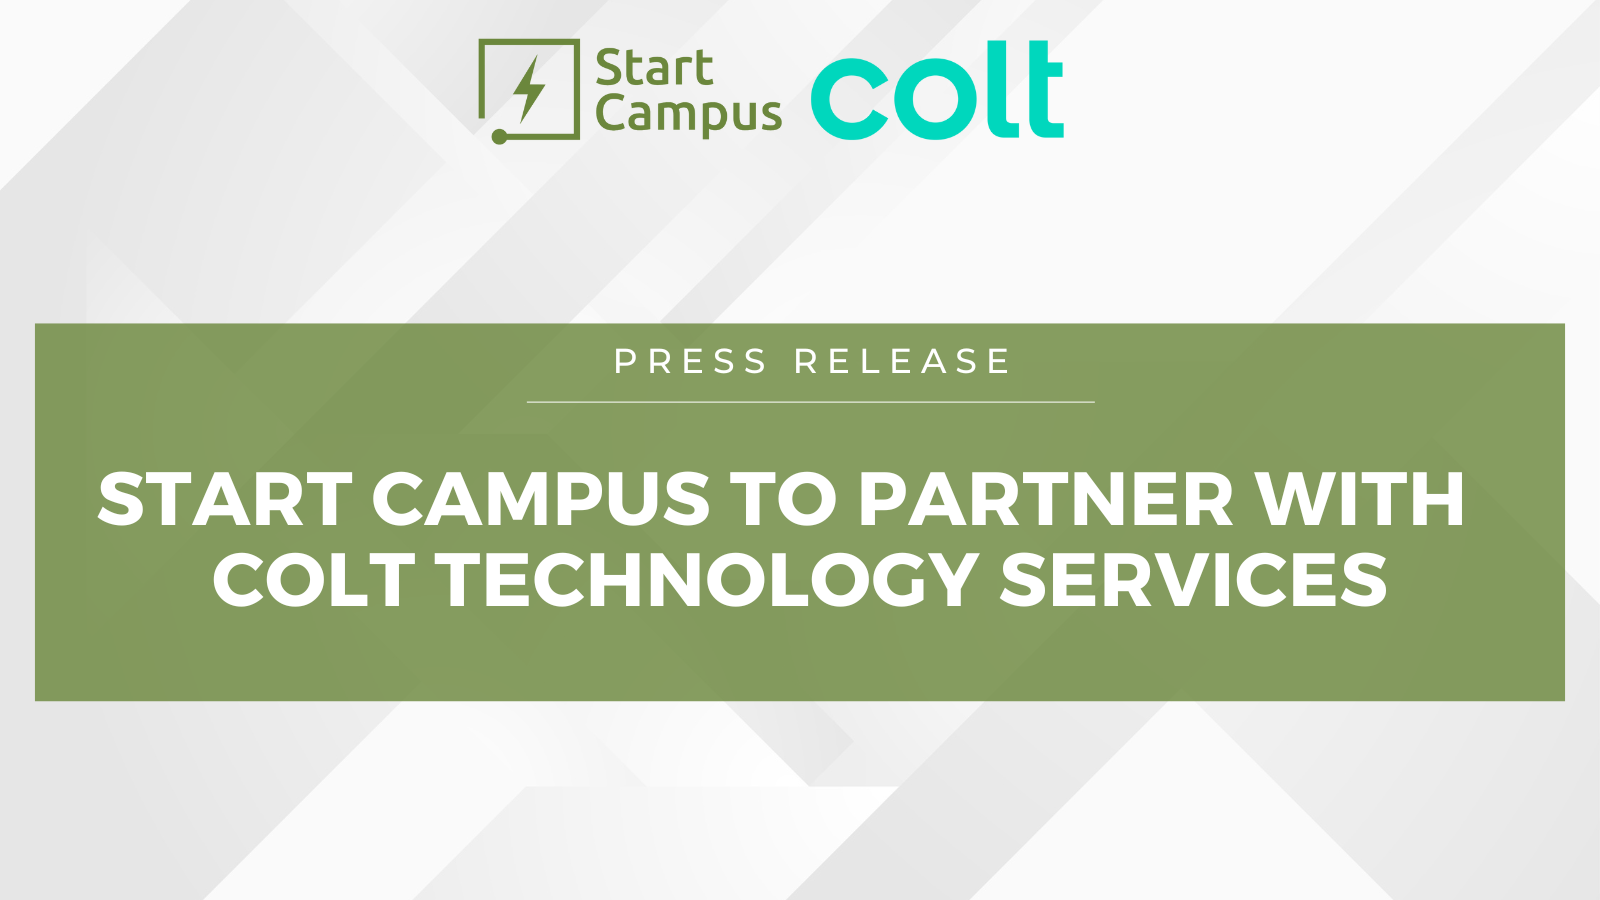 Start Campus to partner with Colt Technology Services